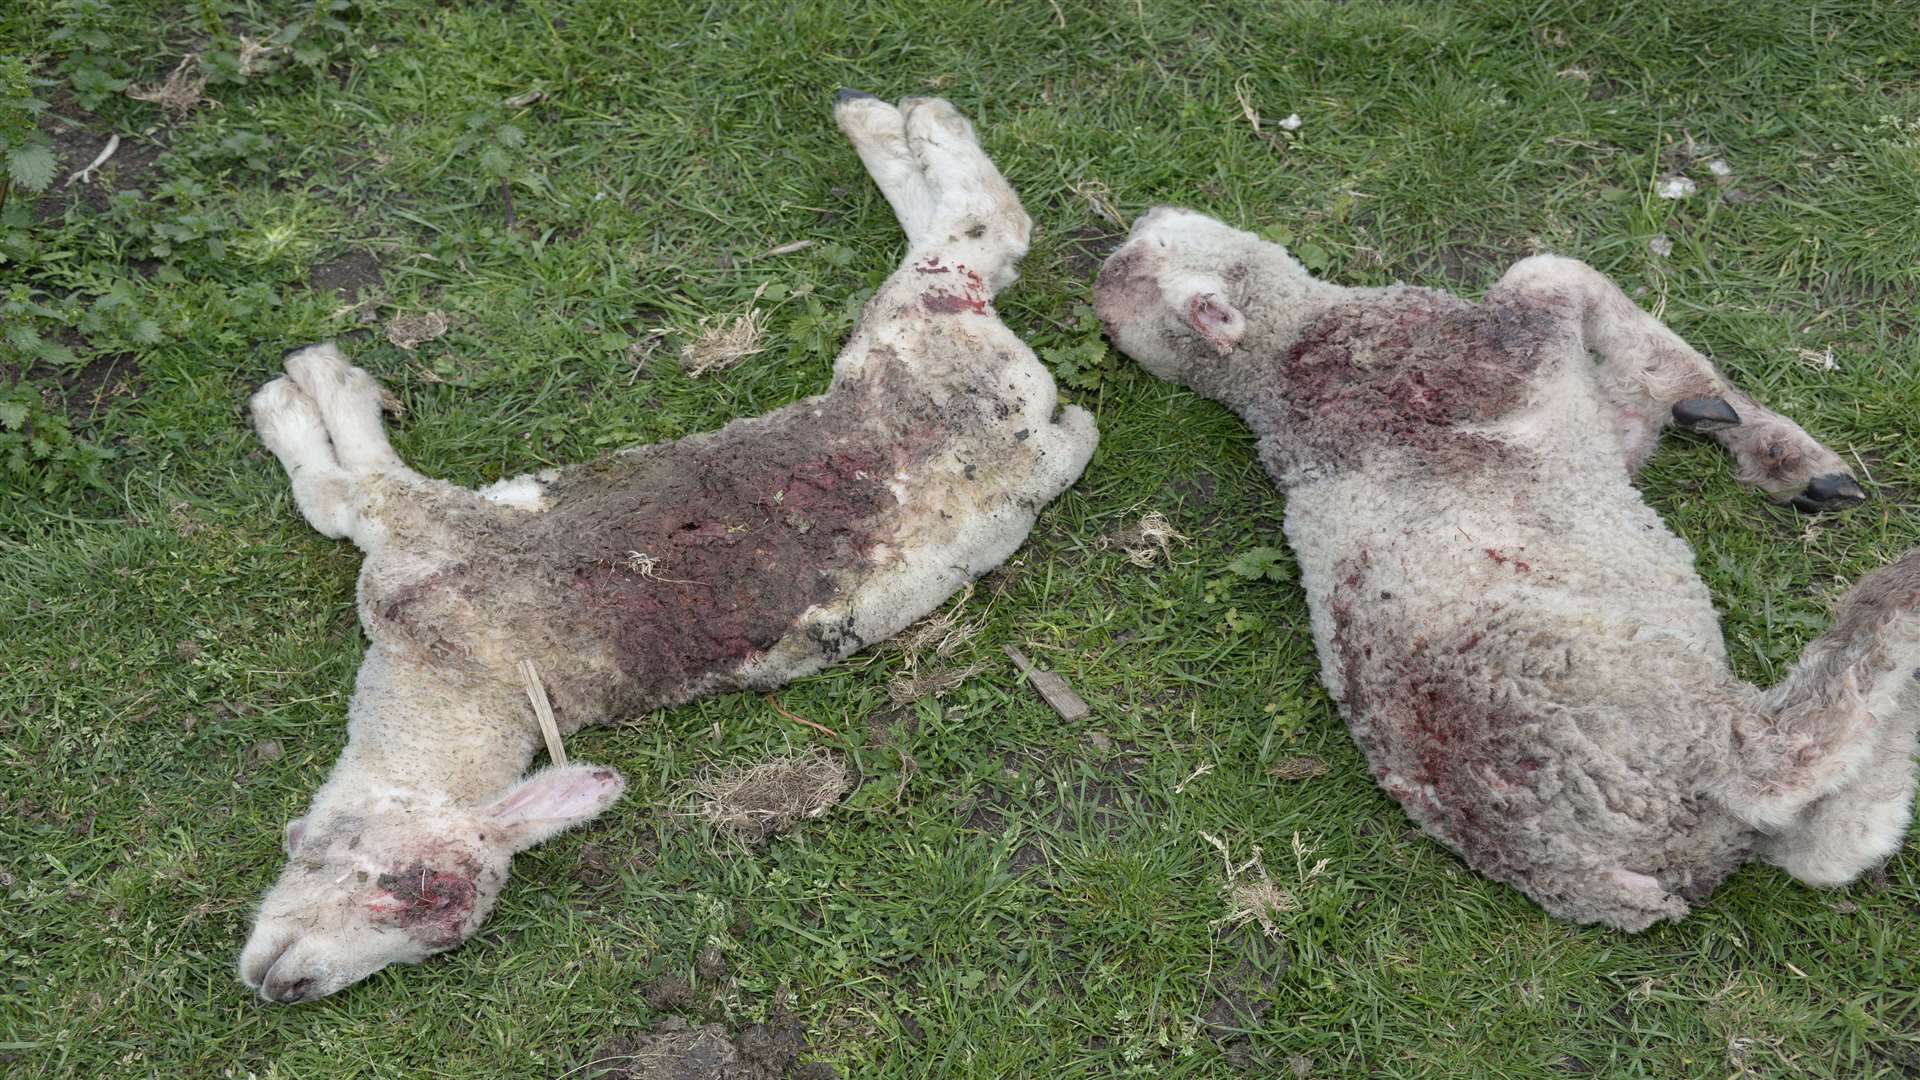 Some of the dead sheep found at Danley Marshes Farm